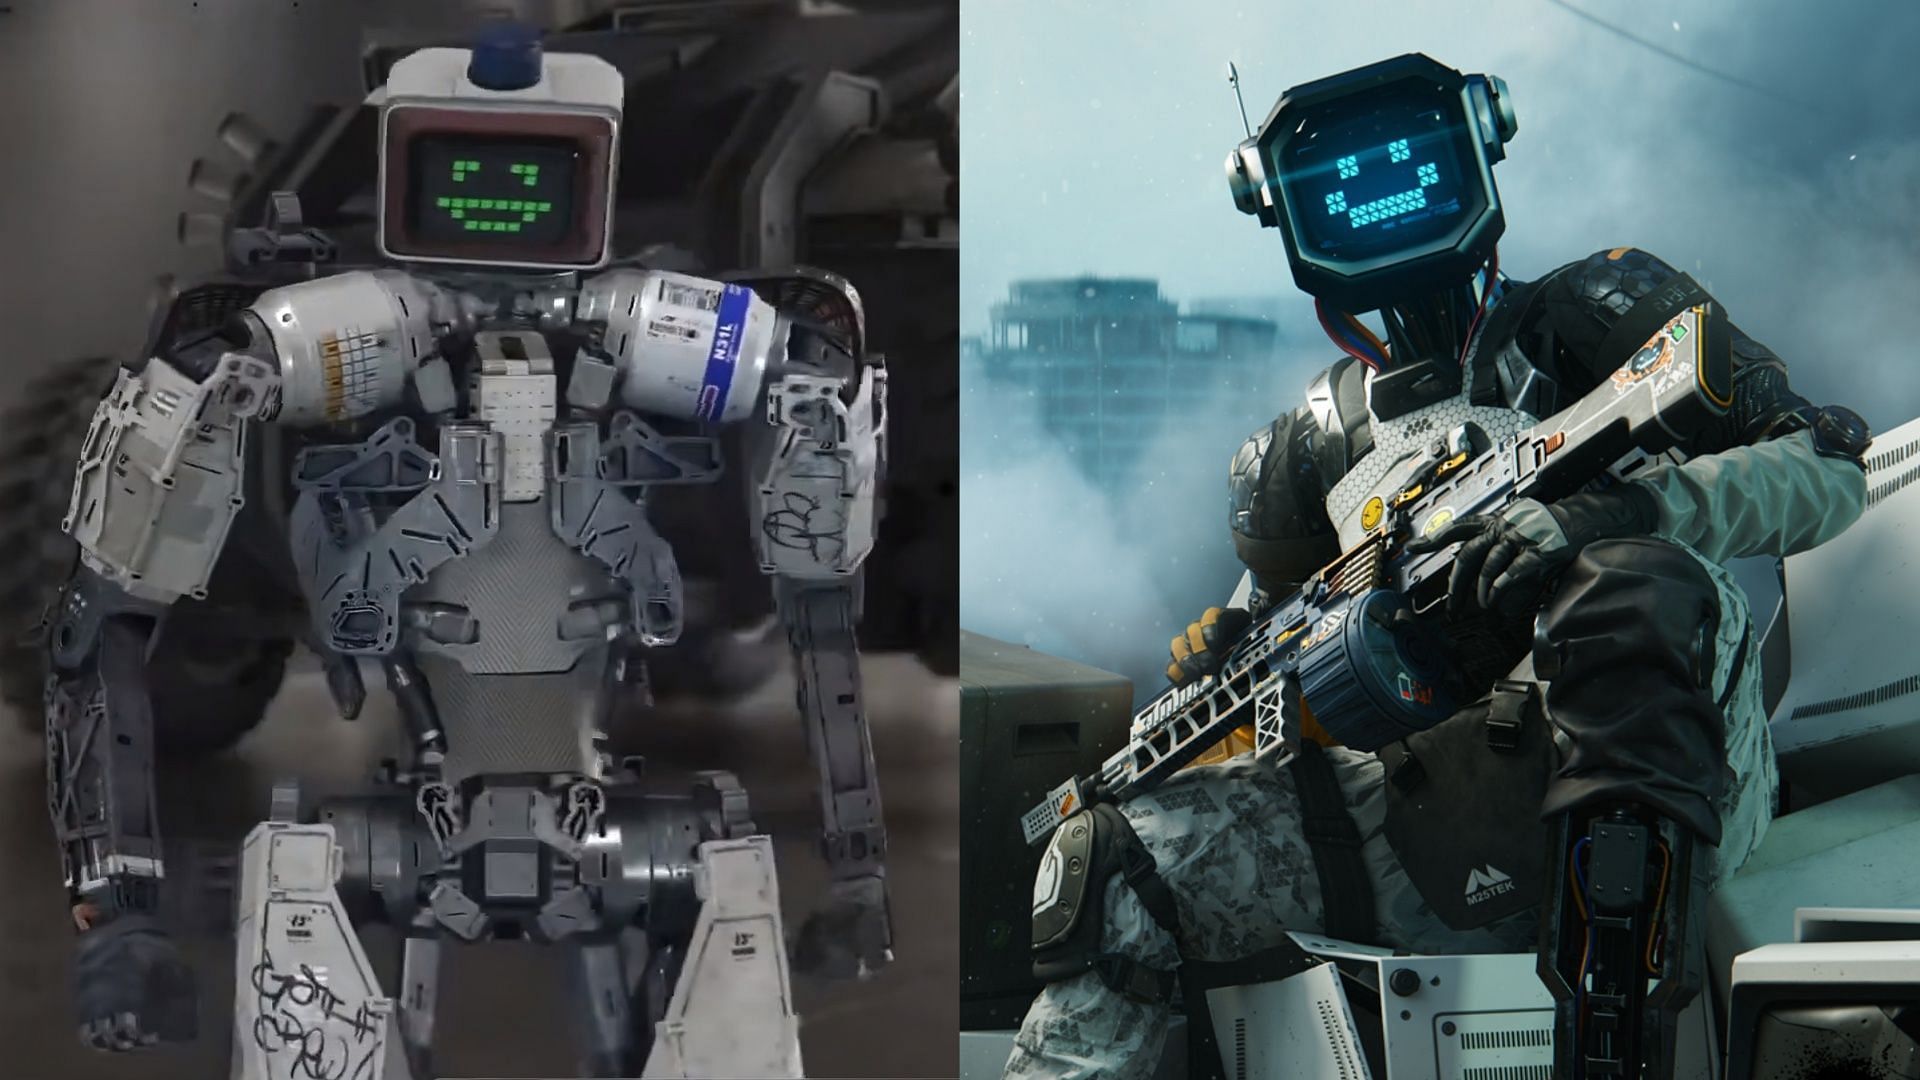 N31L skin from Infinite Warfare on the left and Broadcast Operator skin for Ripper from Modern Warfare 3 on the right.